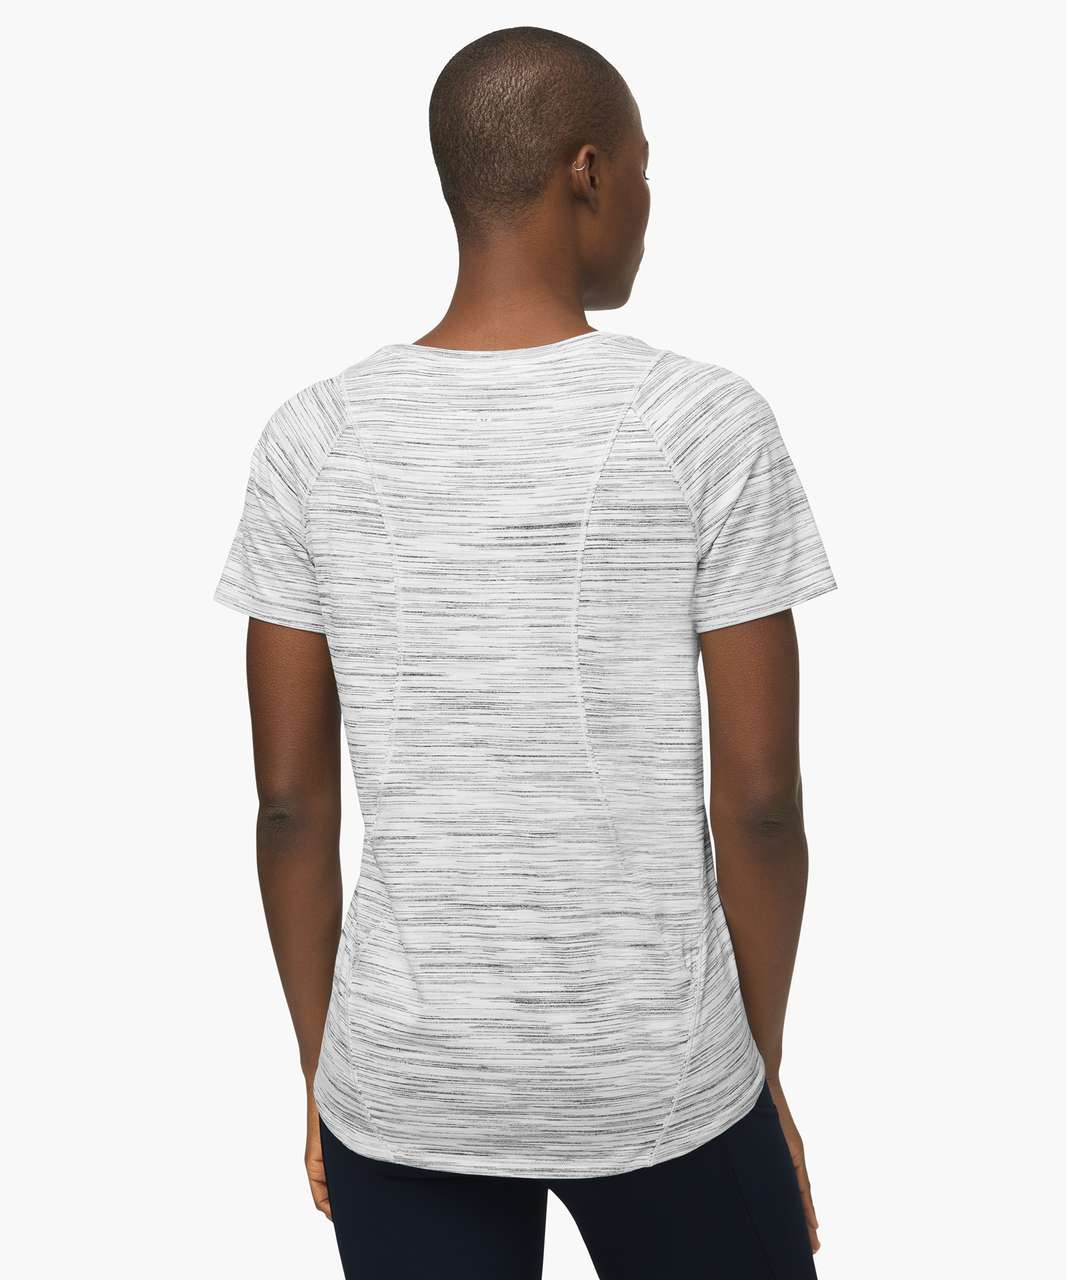 Lululemon Make Miles Count Short Sleeve *Silver - Space Dye Camo White Silver Spoon